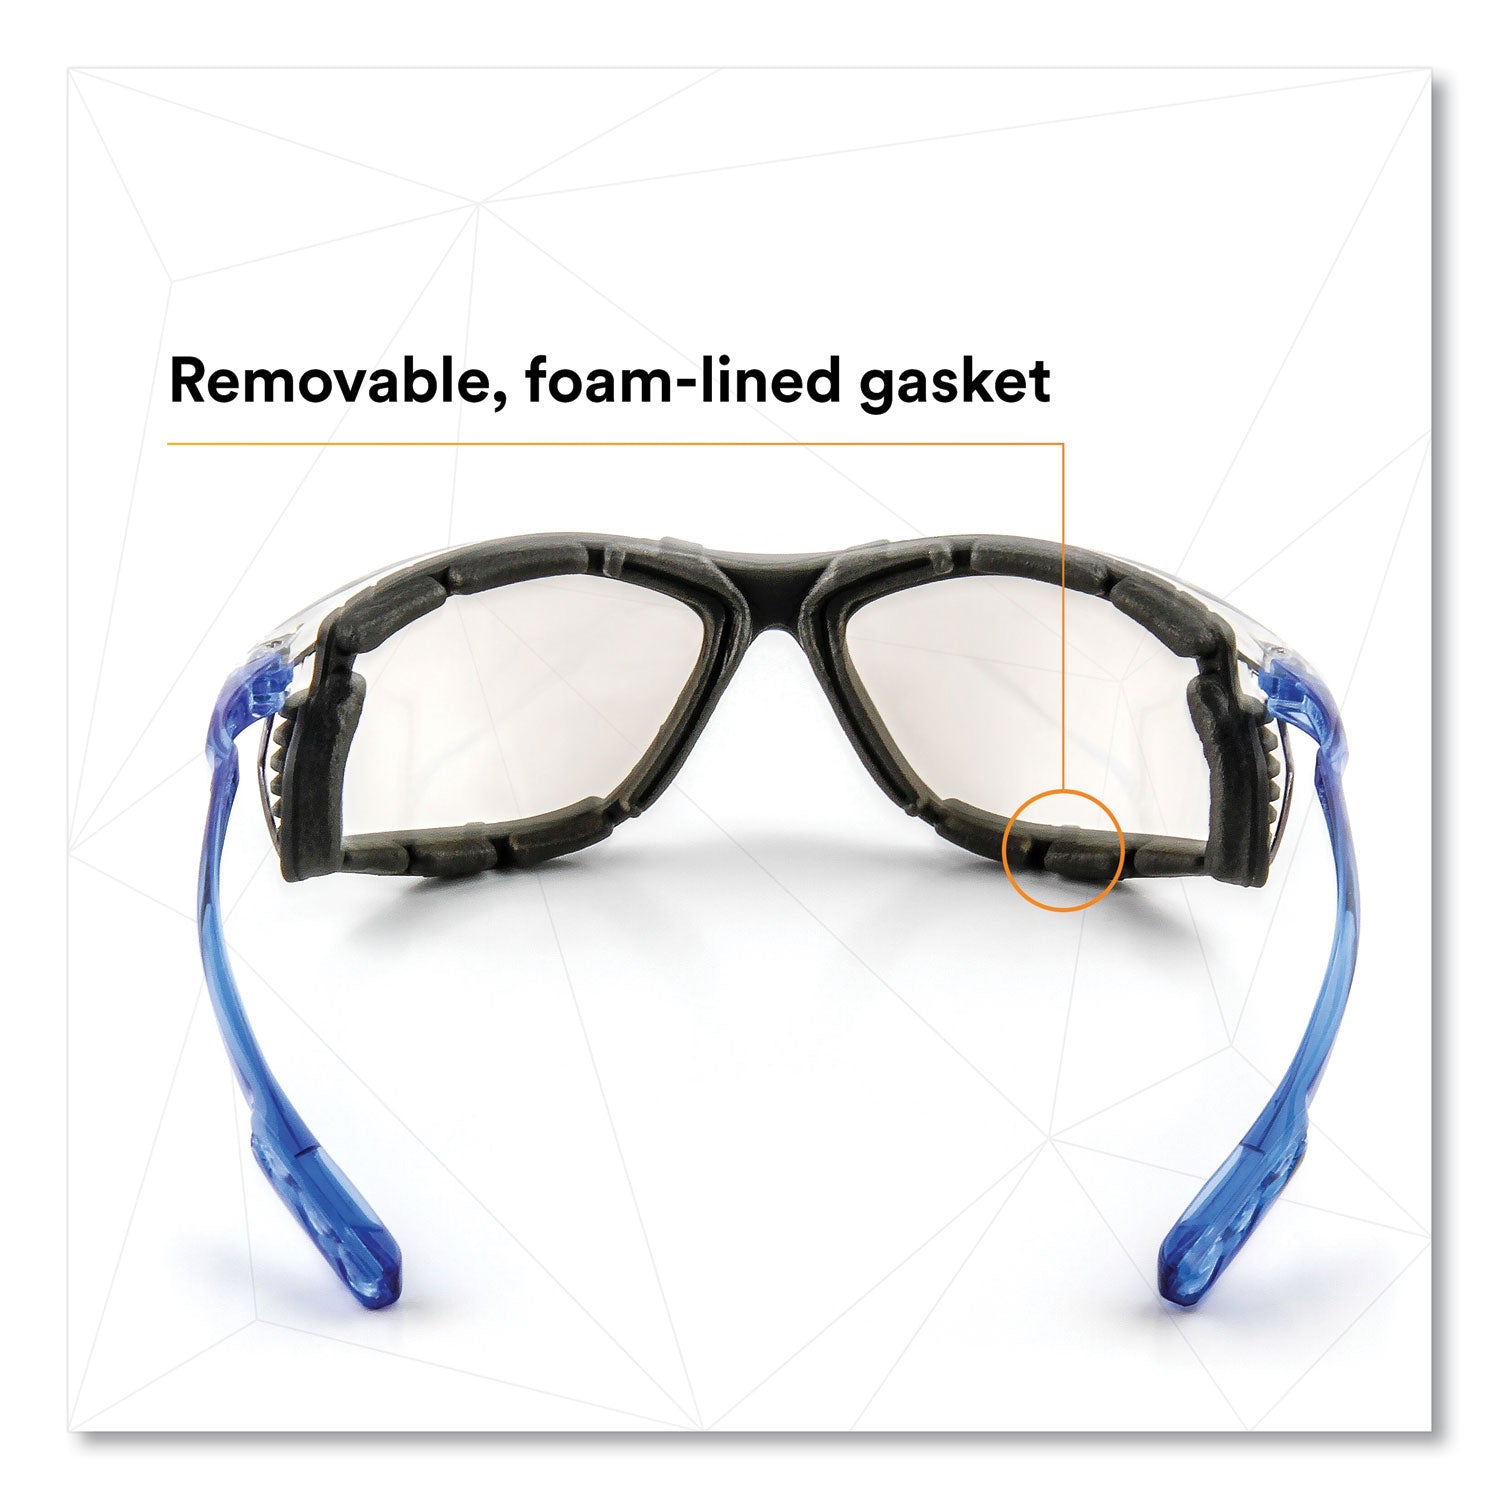 ccs-protective-eyewear-with-foam-gasket-+15-diopter-strength-blue-plastic-frame-clear-polycarbonate-lens_mmmvc215af - 3